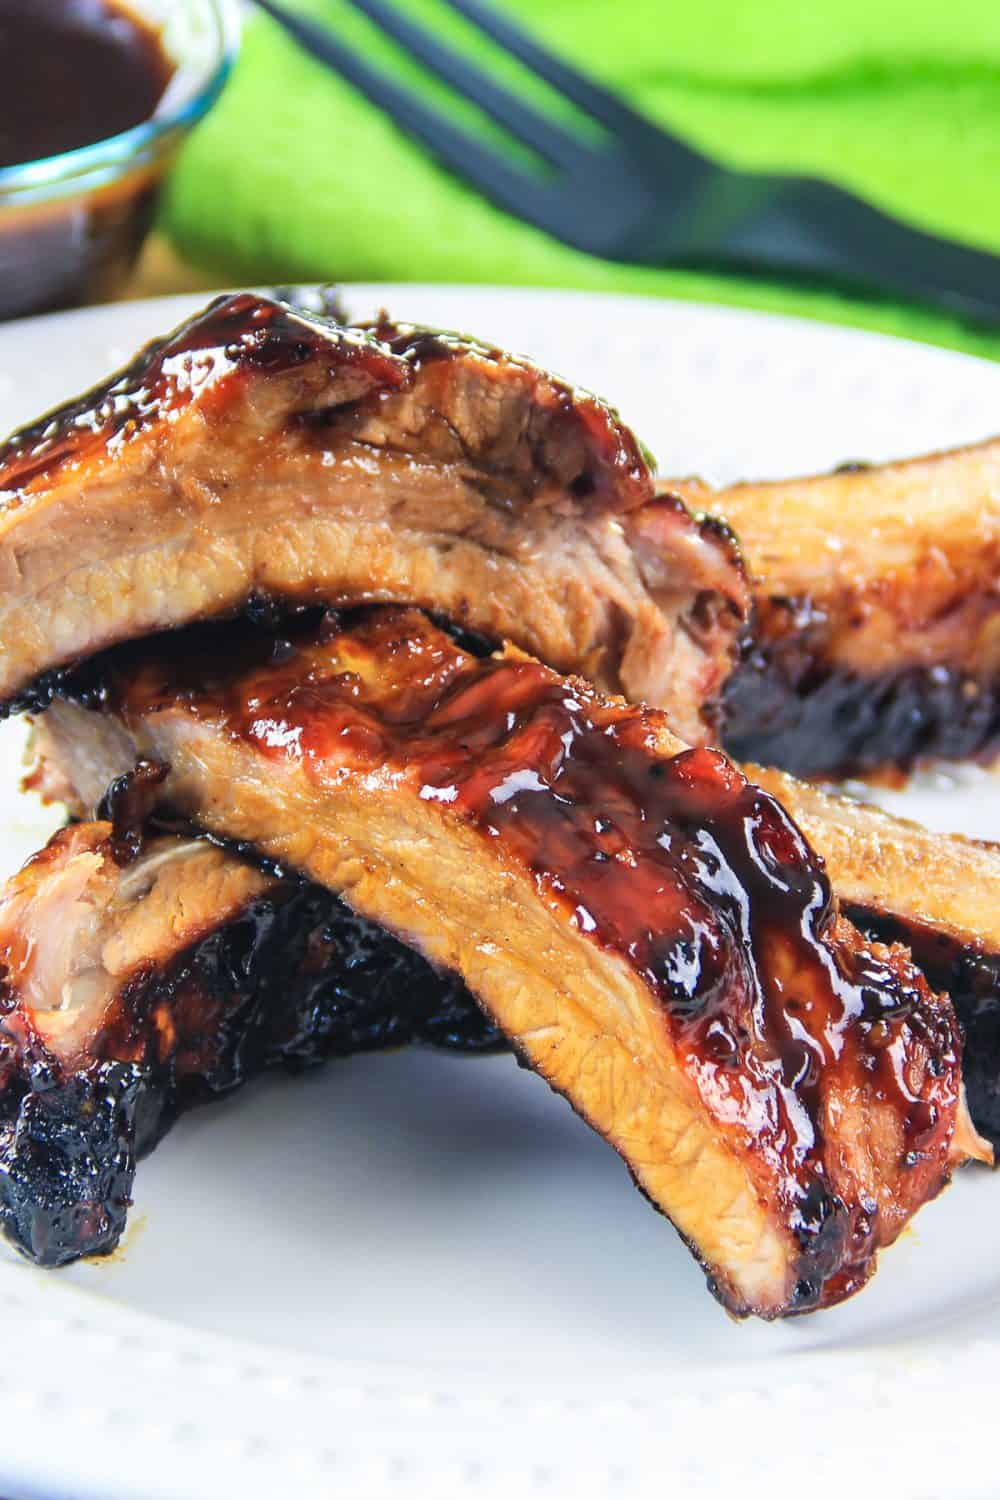 Barbecue Pork Ribs Simply Home Cooked,Saltwater Fish Tank Background